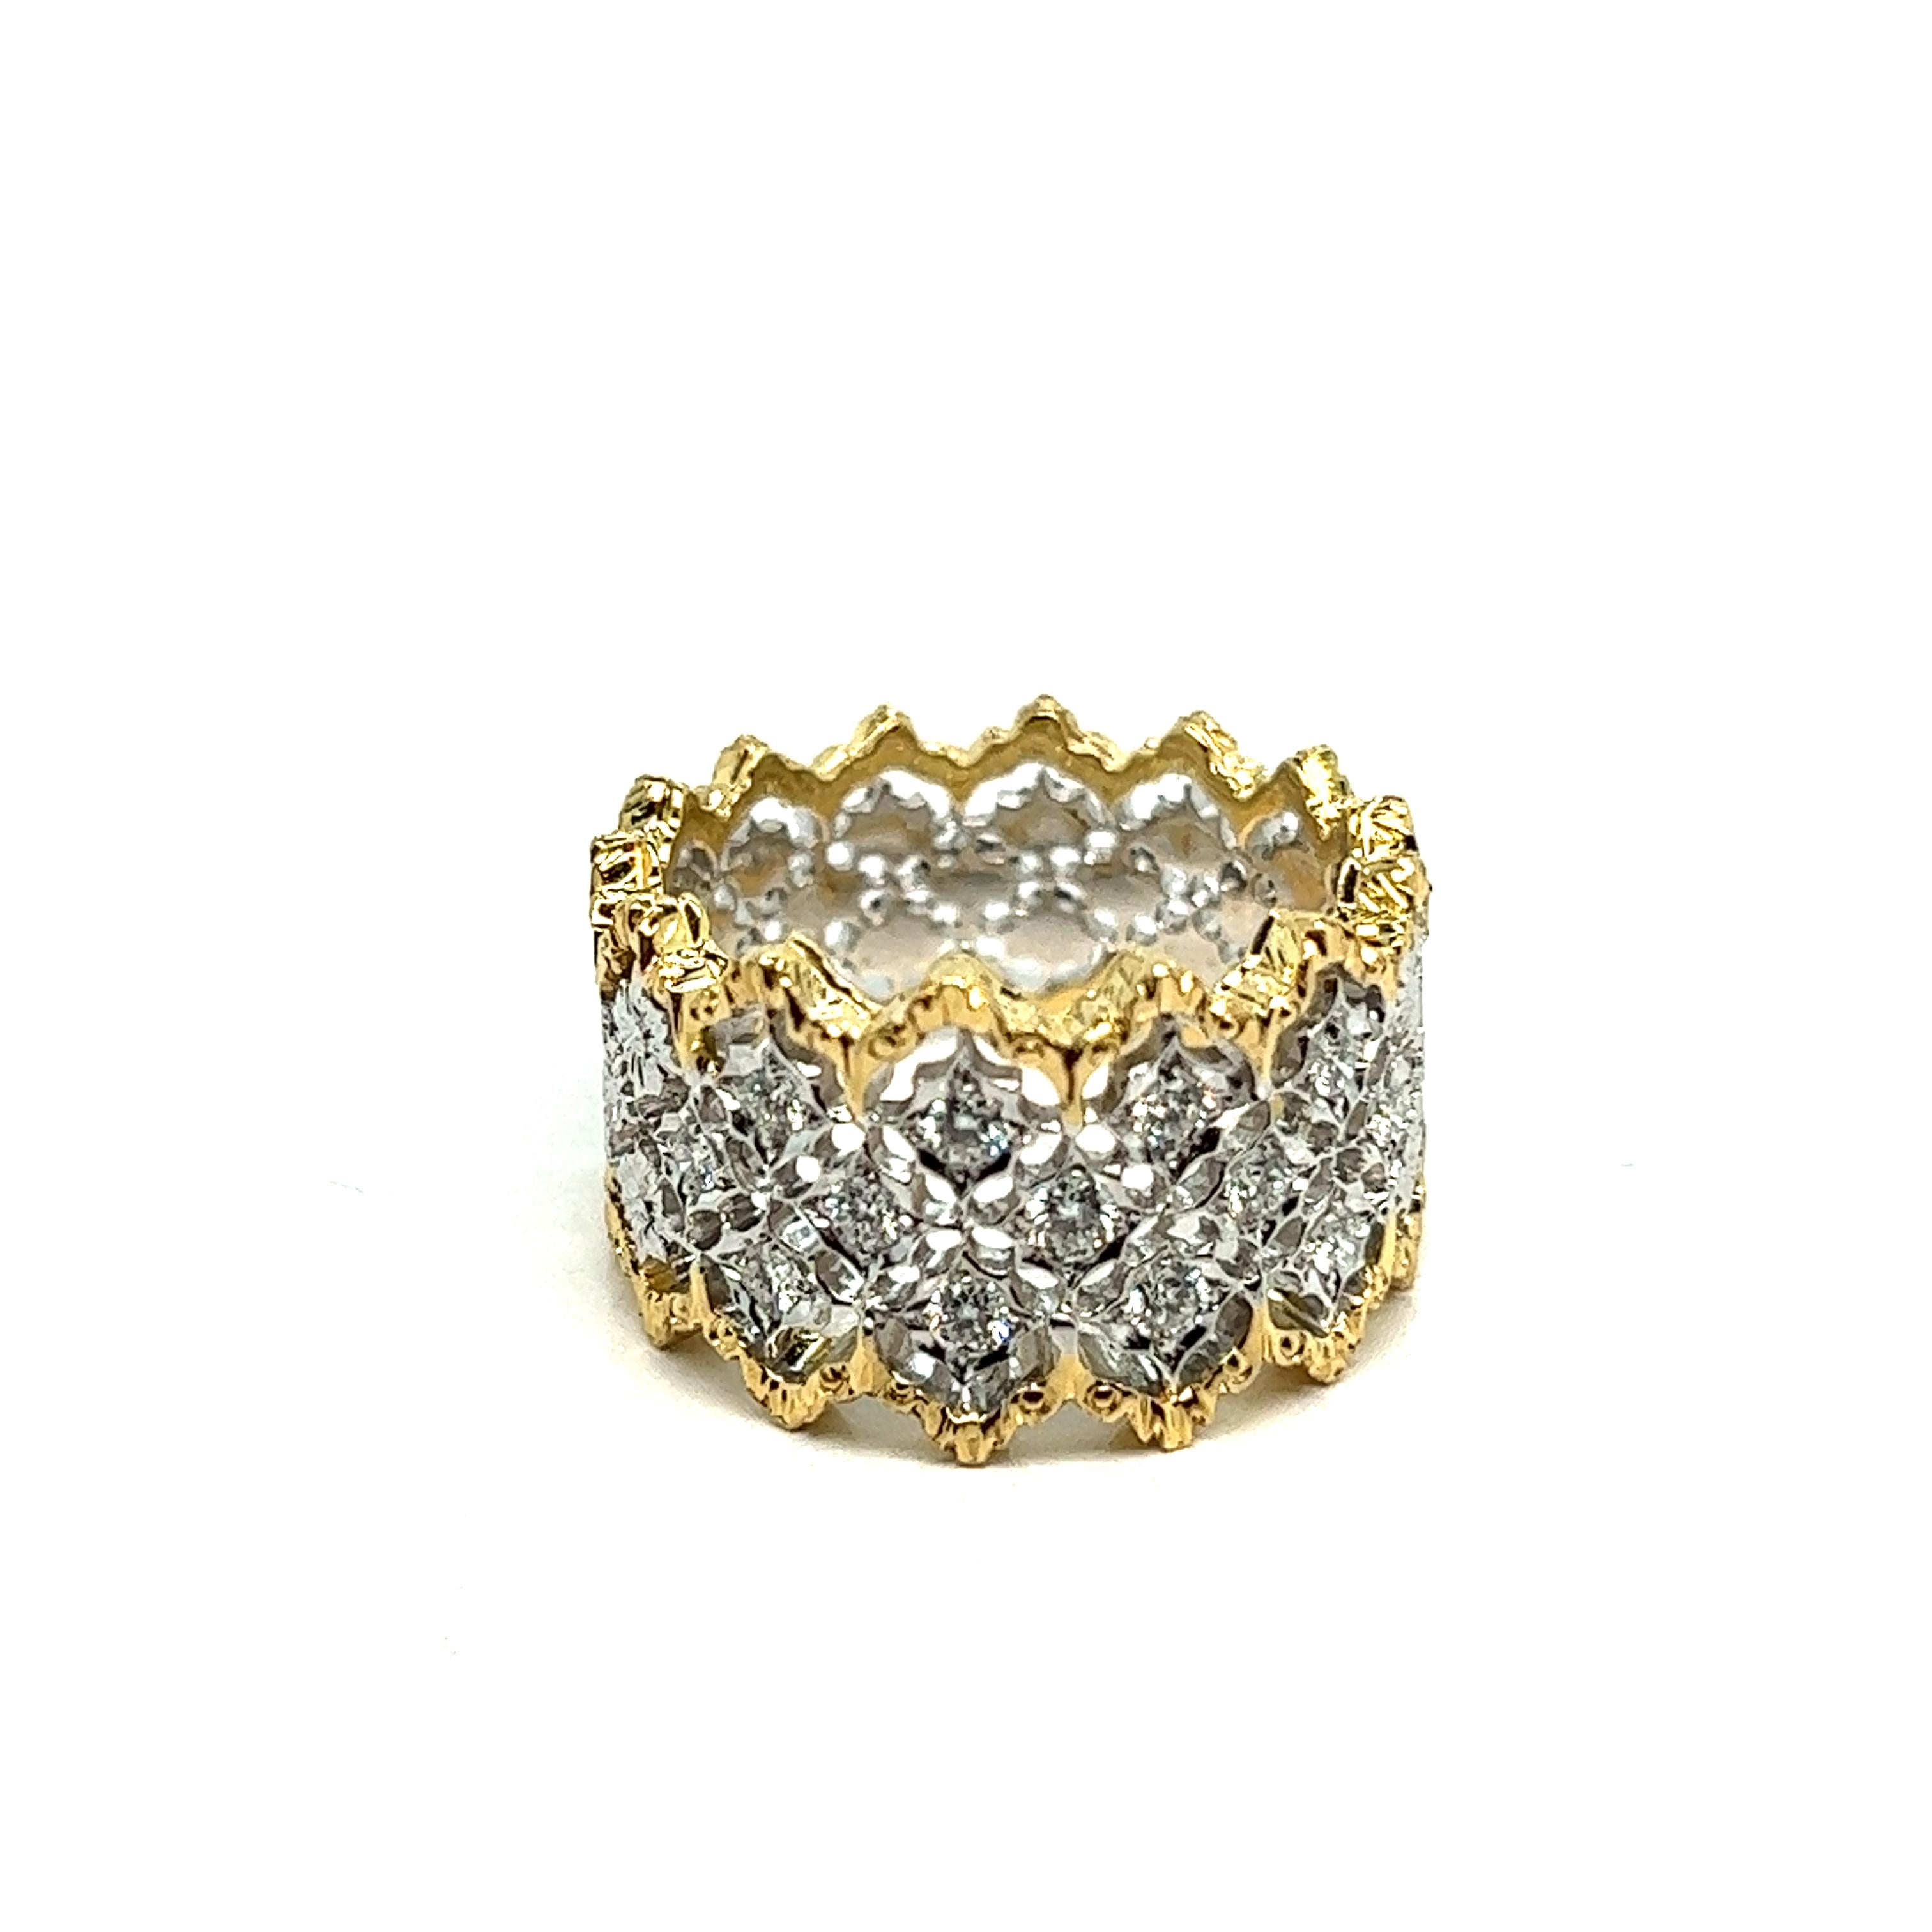 Baroque Lace Ring with 13 Brilliant Cut Diamonds in 18K White and Yellow Gold 2